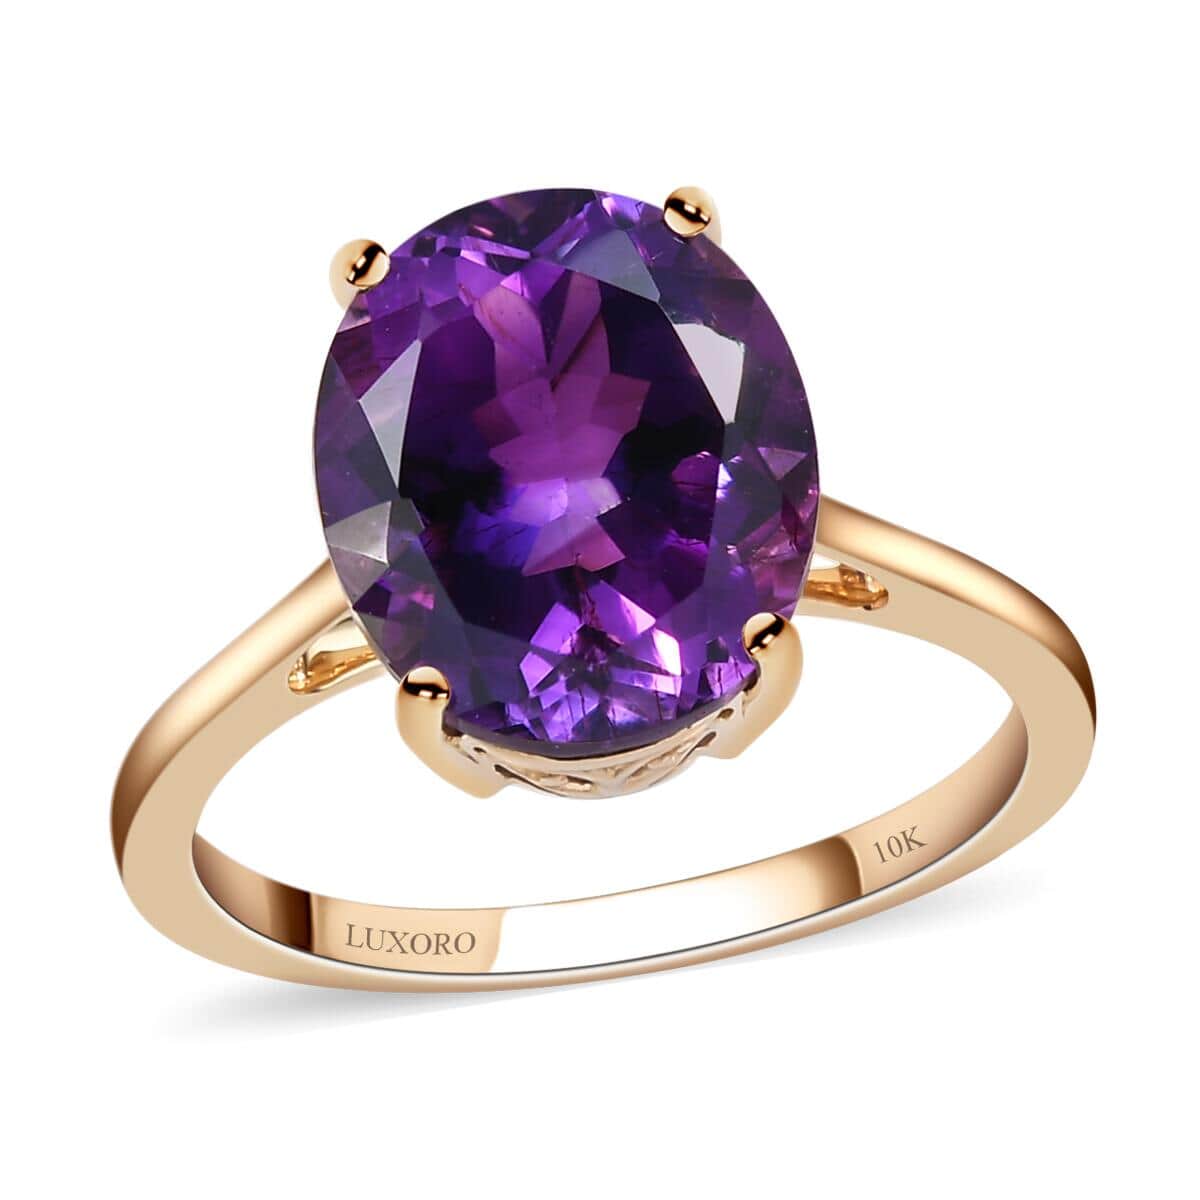 LUXORO 10K Yellow Gold AAA Moroccan Amethyst Solitaire Ring (Size 7.0) 2.40 Grams (Delivery in 12-15 Business Days) 5.15 ctw image number 0